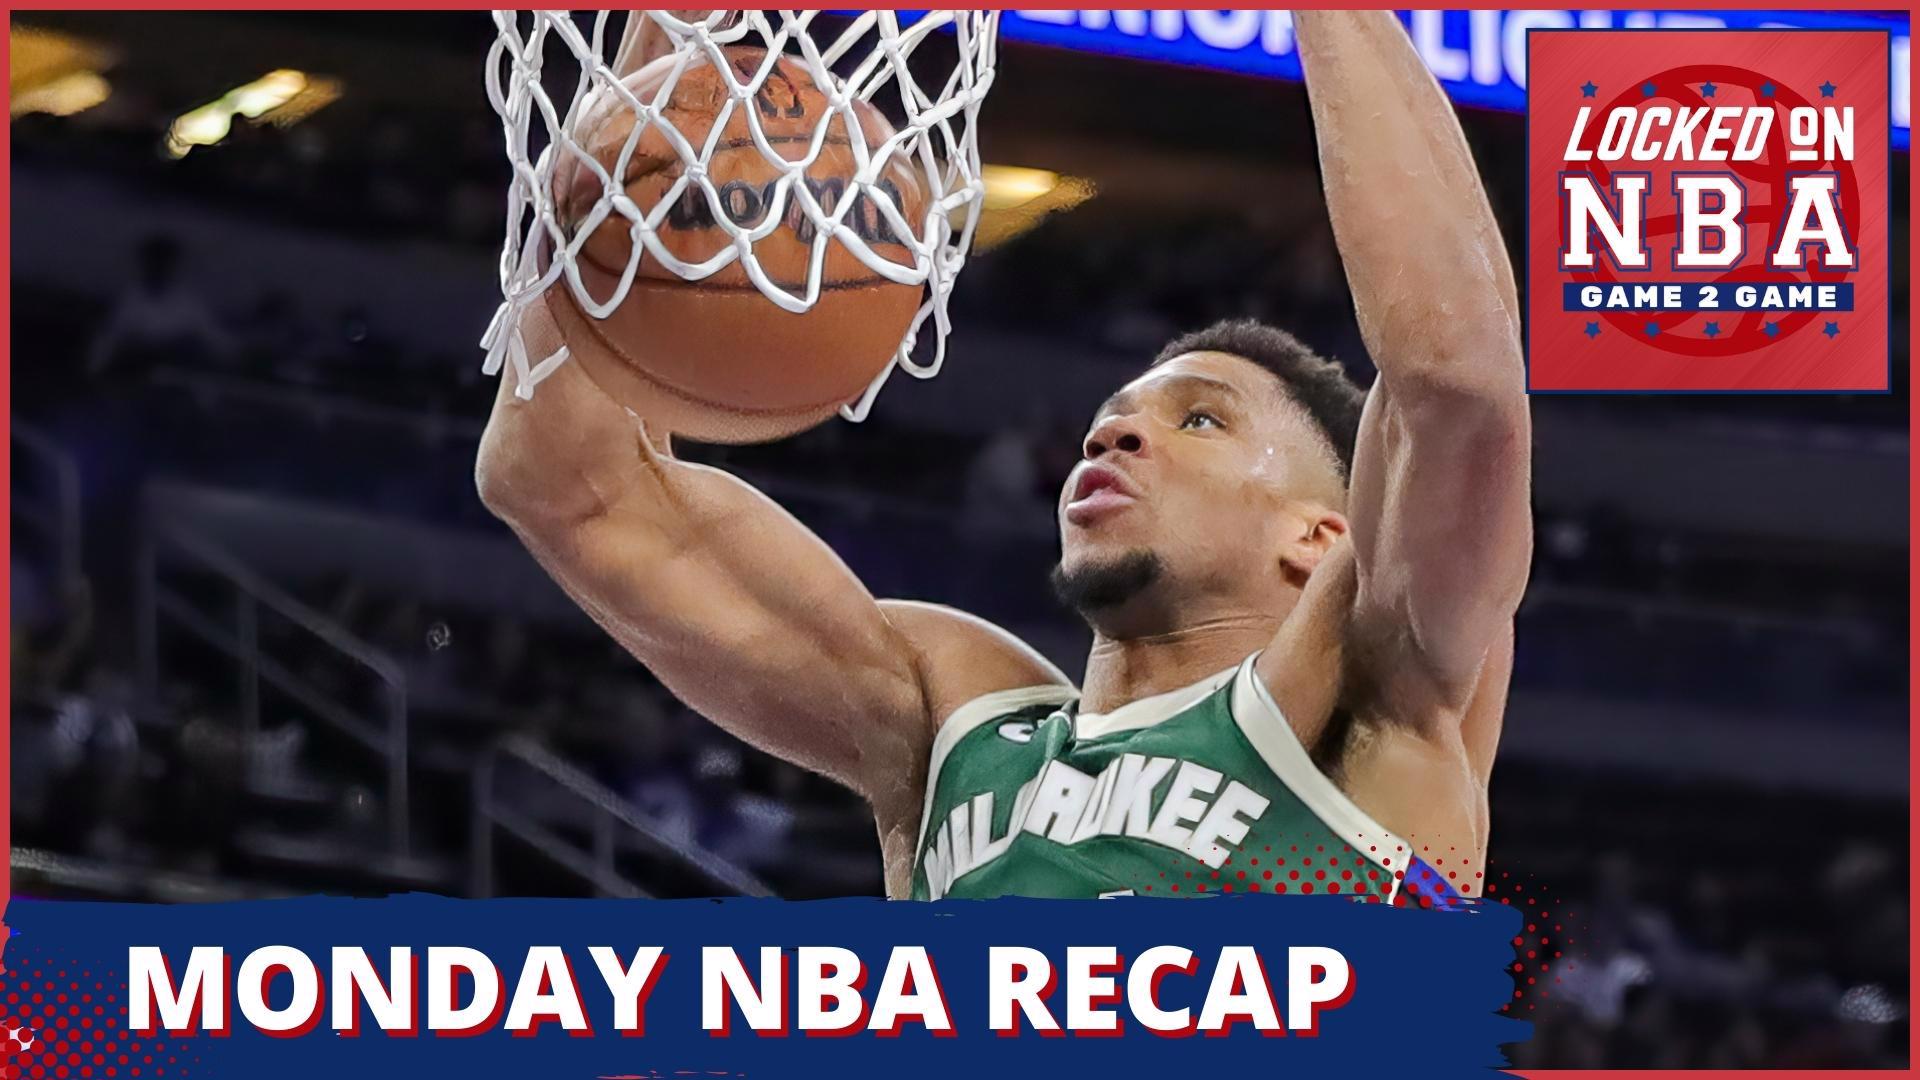 The latest breakdown of Monday's NBA games from the Mavericks taking down the Suns to the Pacers shocking the Warriors.